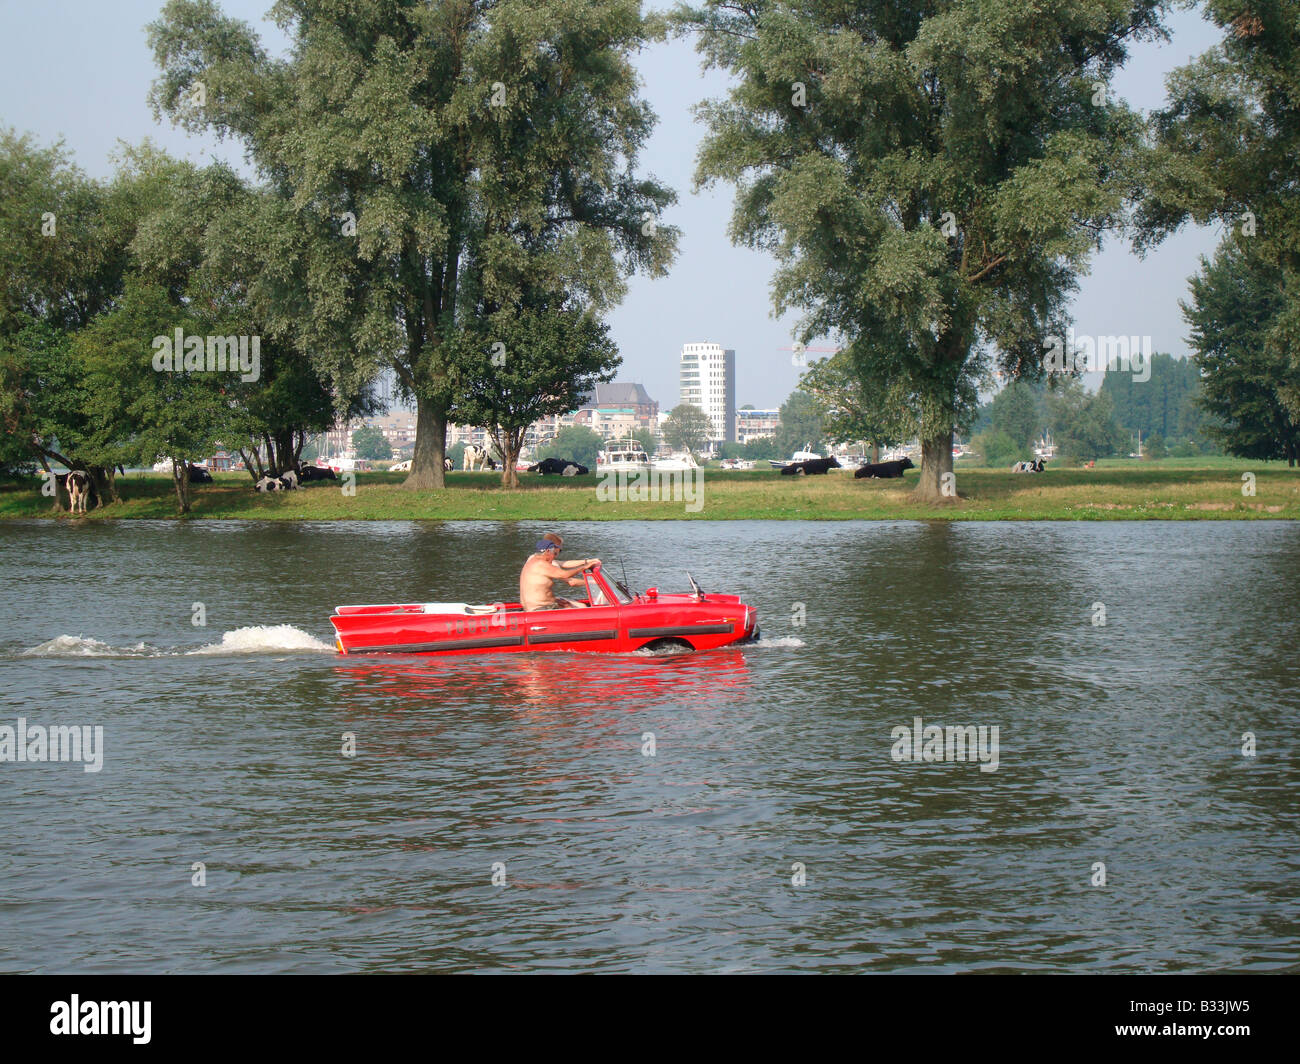 Amphicar in the water Stock Photo